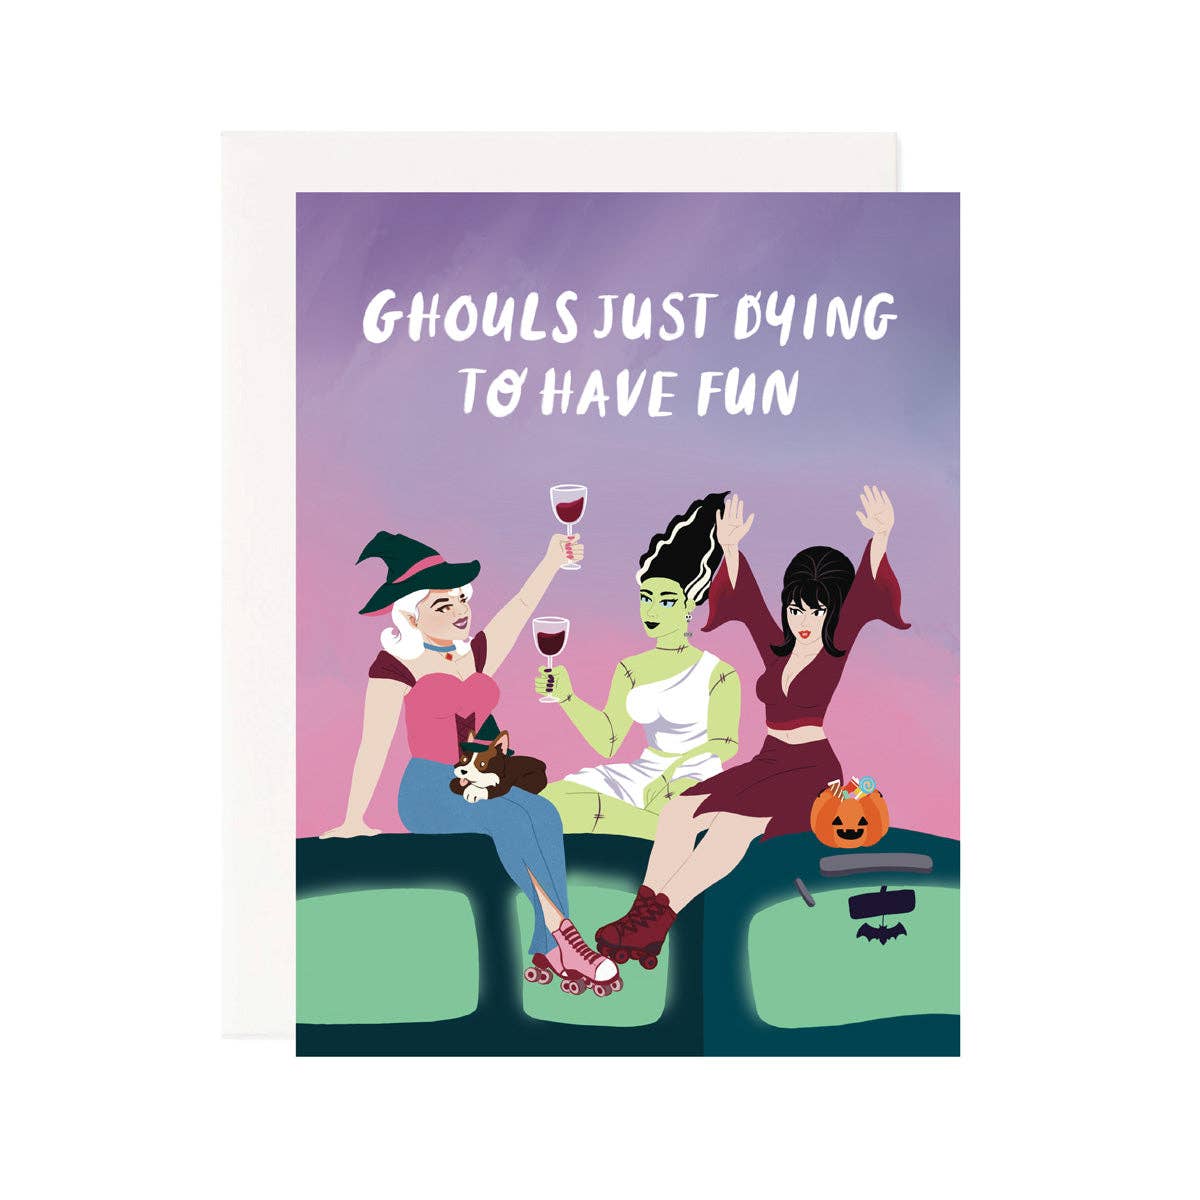 Purple and pink background with images of a witch, bride of Frankenstein and Elvira celebrating and drinking wine with white text says, “Ghouls just dying to have fun”. White envelope included.      